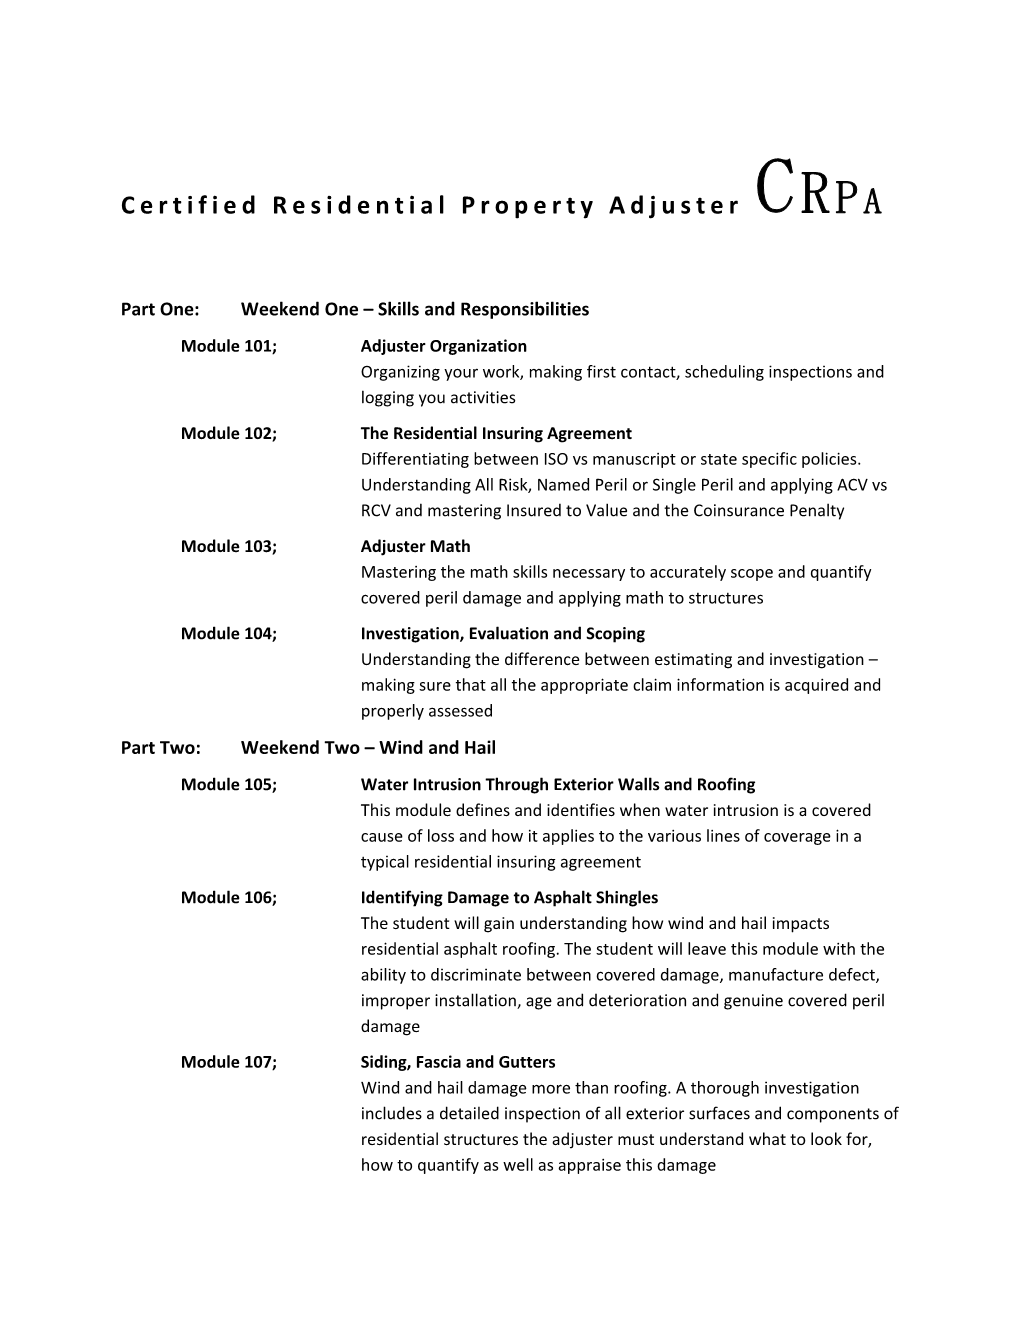 Module 102;The Residential Insuring Agreement